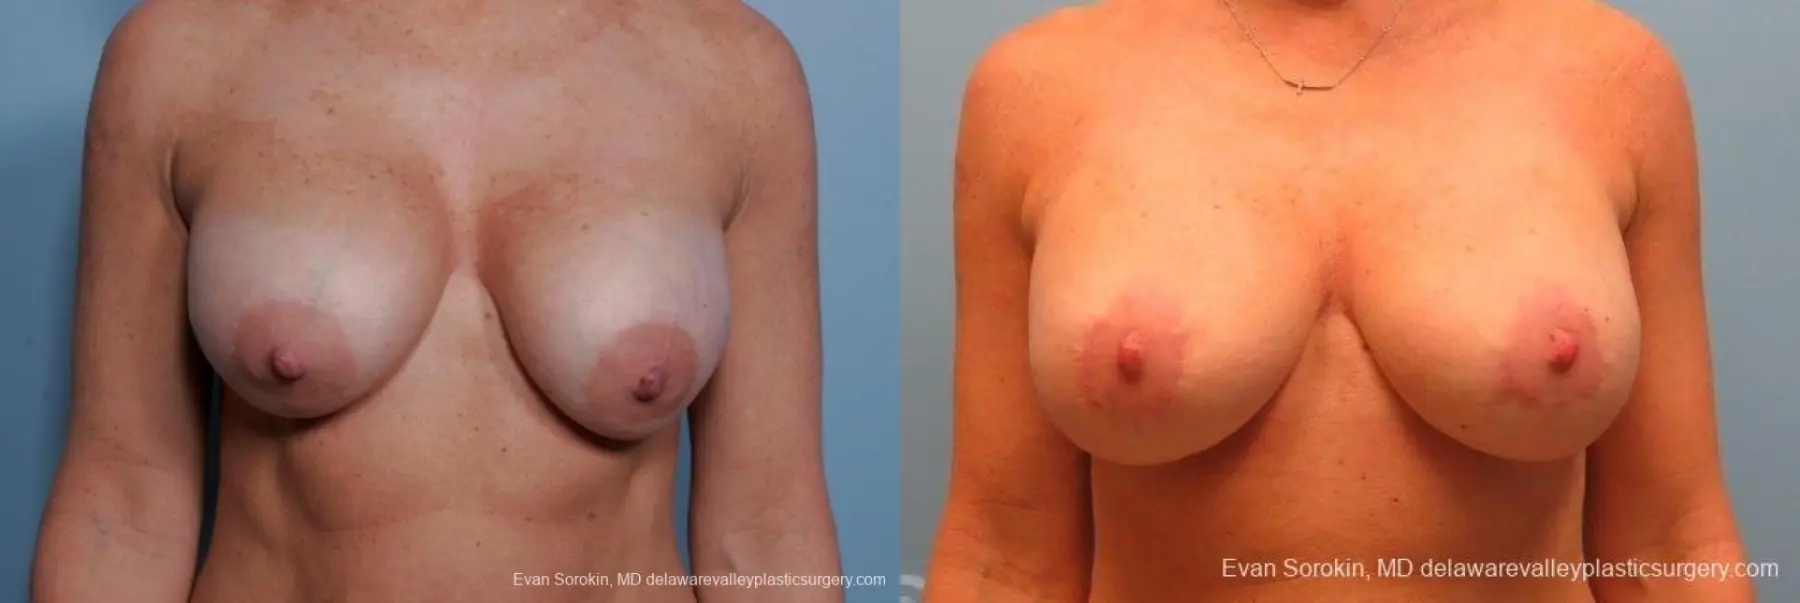 Philadelphia Breast Augmentation 8693 - Before and After